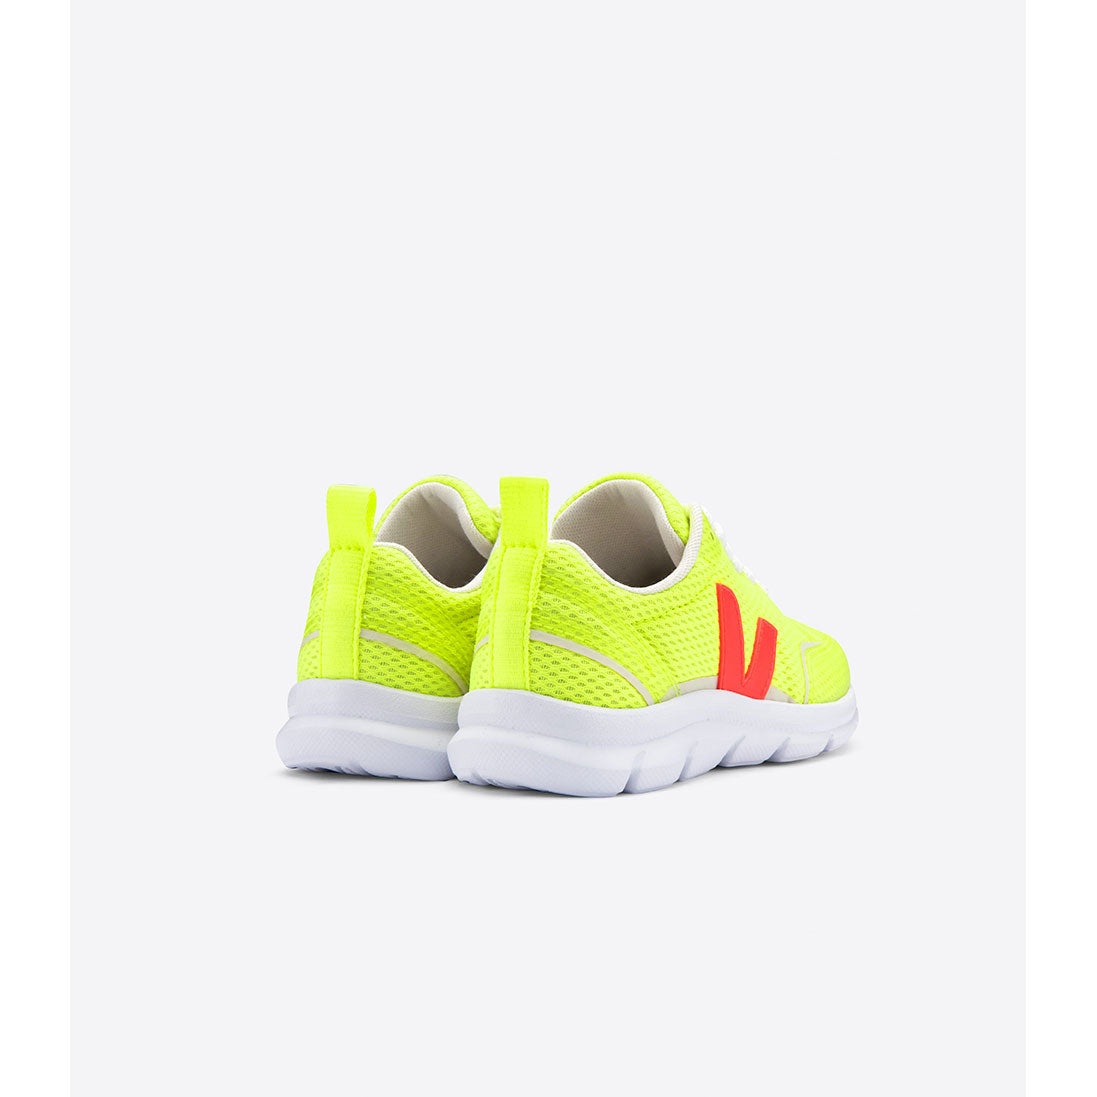 VEJA shoes Veja Neon Yellow Mesh Canary Sneakers